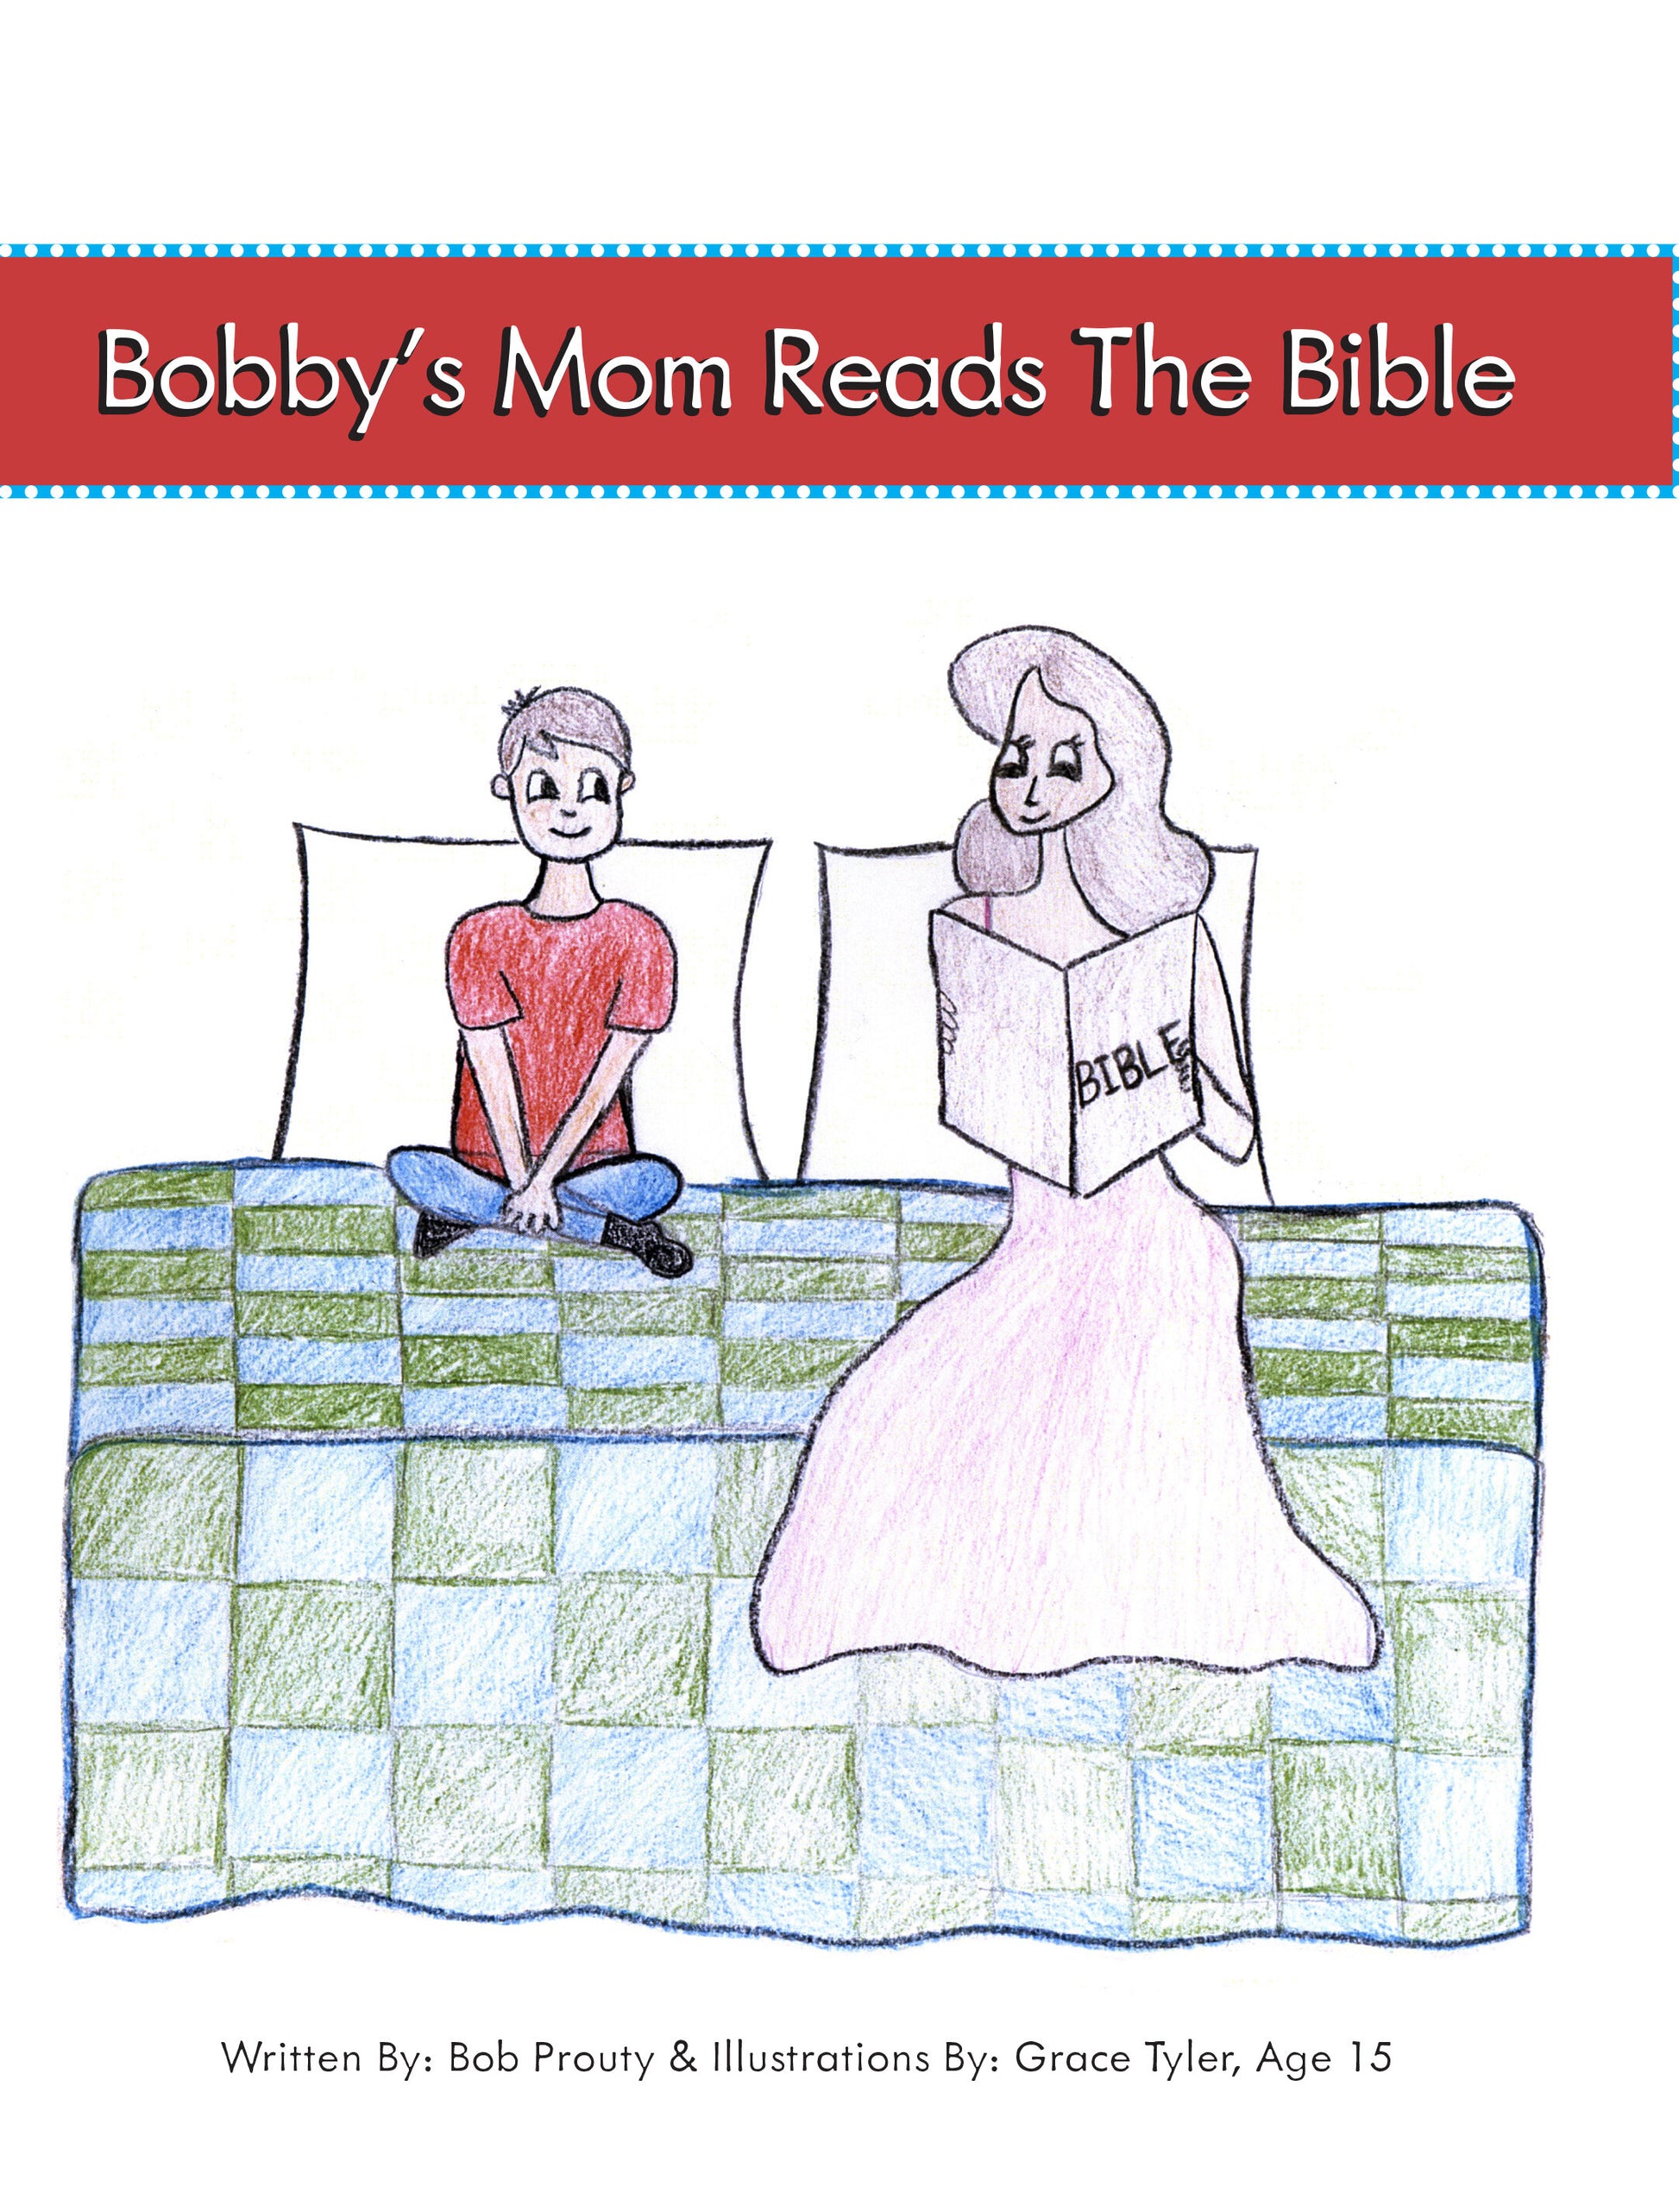 Bobby's Mom Reads The Bible